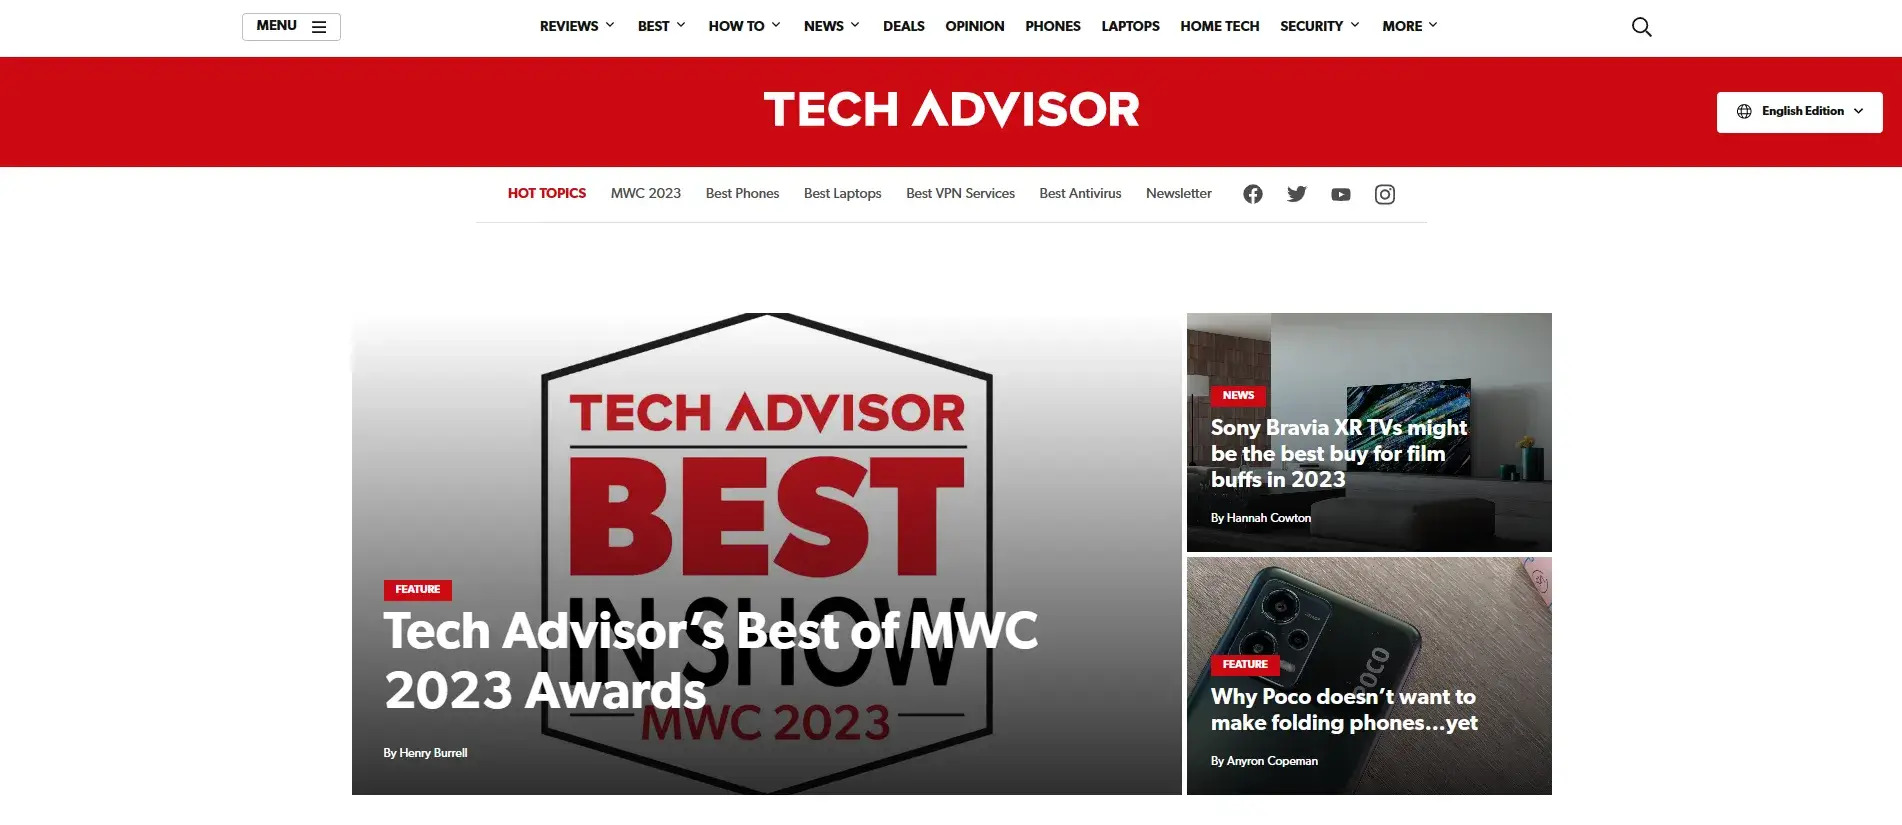 Bloggers Review Products: Tech Advisor